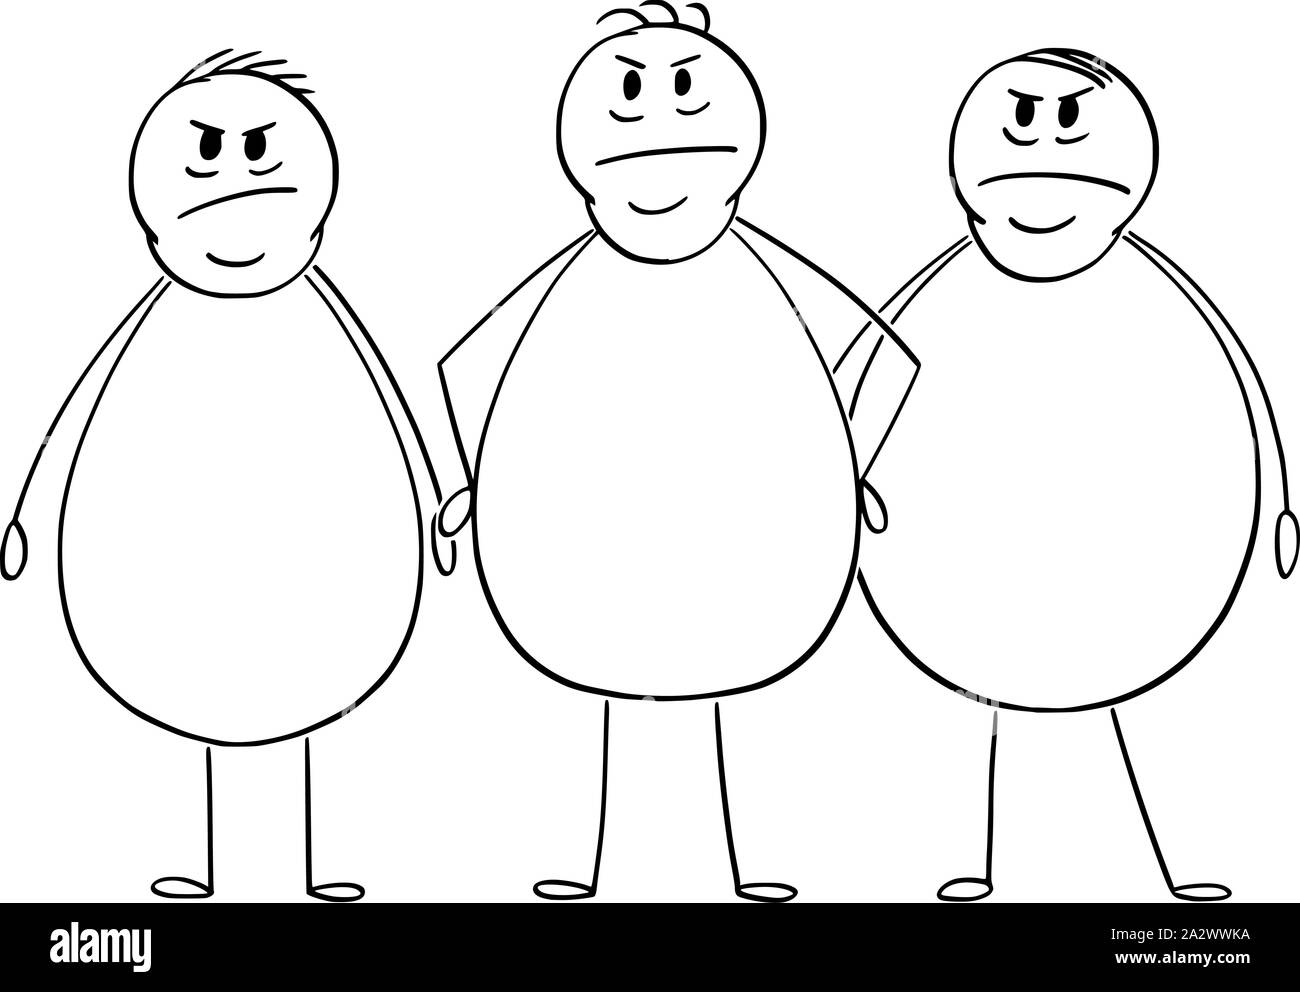 Vector cartoon stick figure drawing conceptual illustration of group of three angry overweight or fat men. Stock Vector